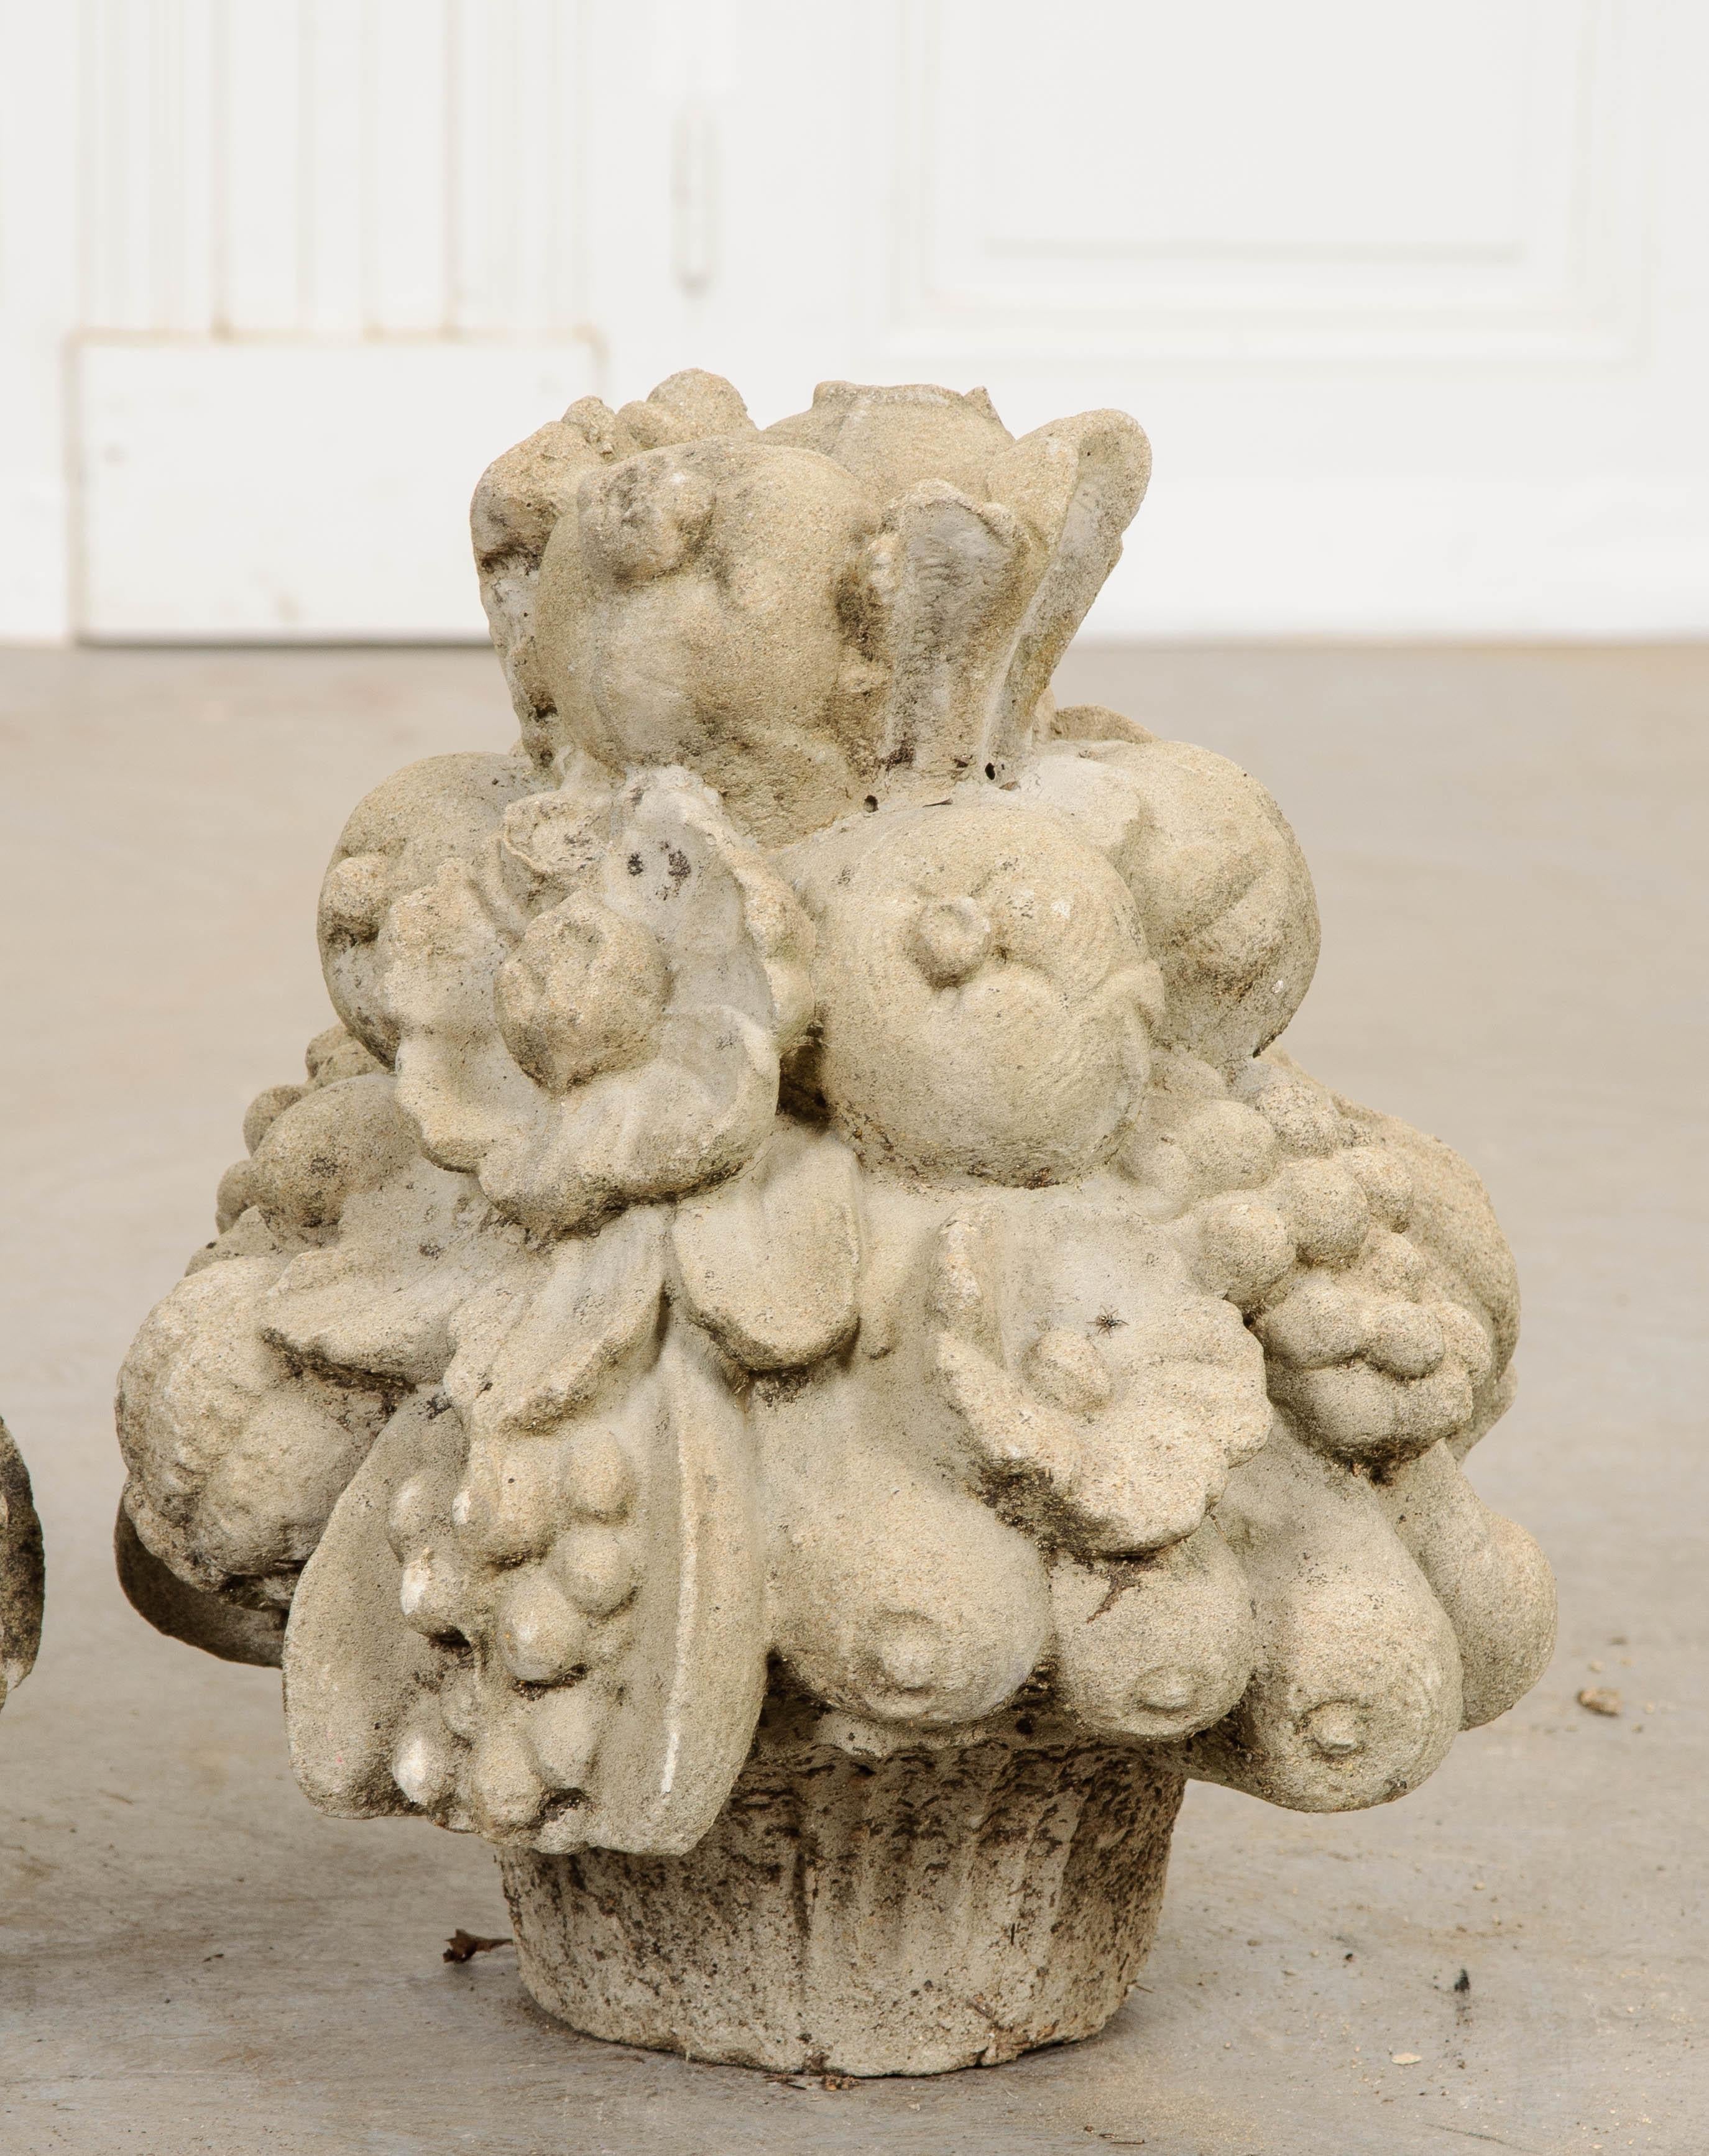 A cornucopia of fruit - cast in stone and piled high - create each of these decorative French finials. Peaches, plums and other stone fruit can be found mixed in with the harvest. Decades of weather have afforded the pair an outstanding patina that